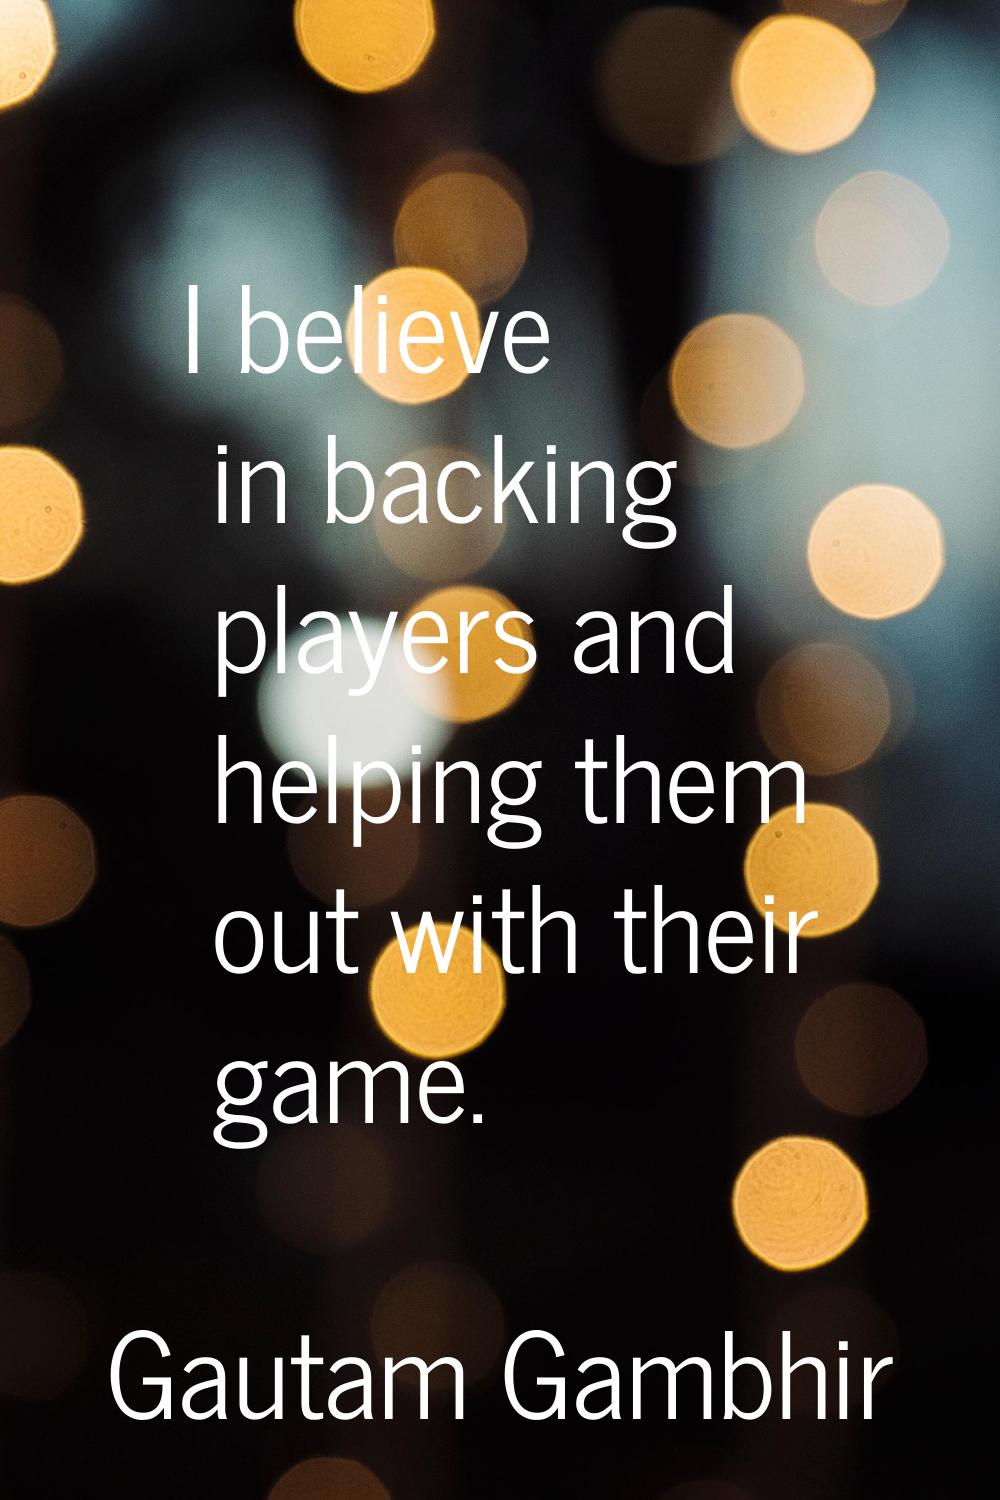 I believe in backing players and helping them out with their game.